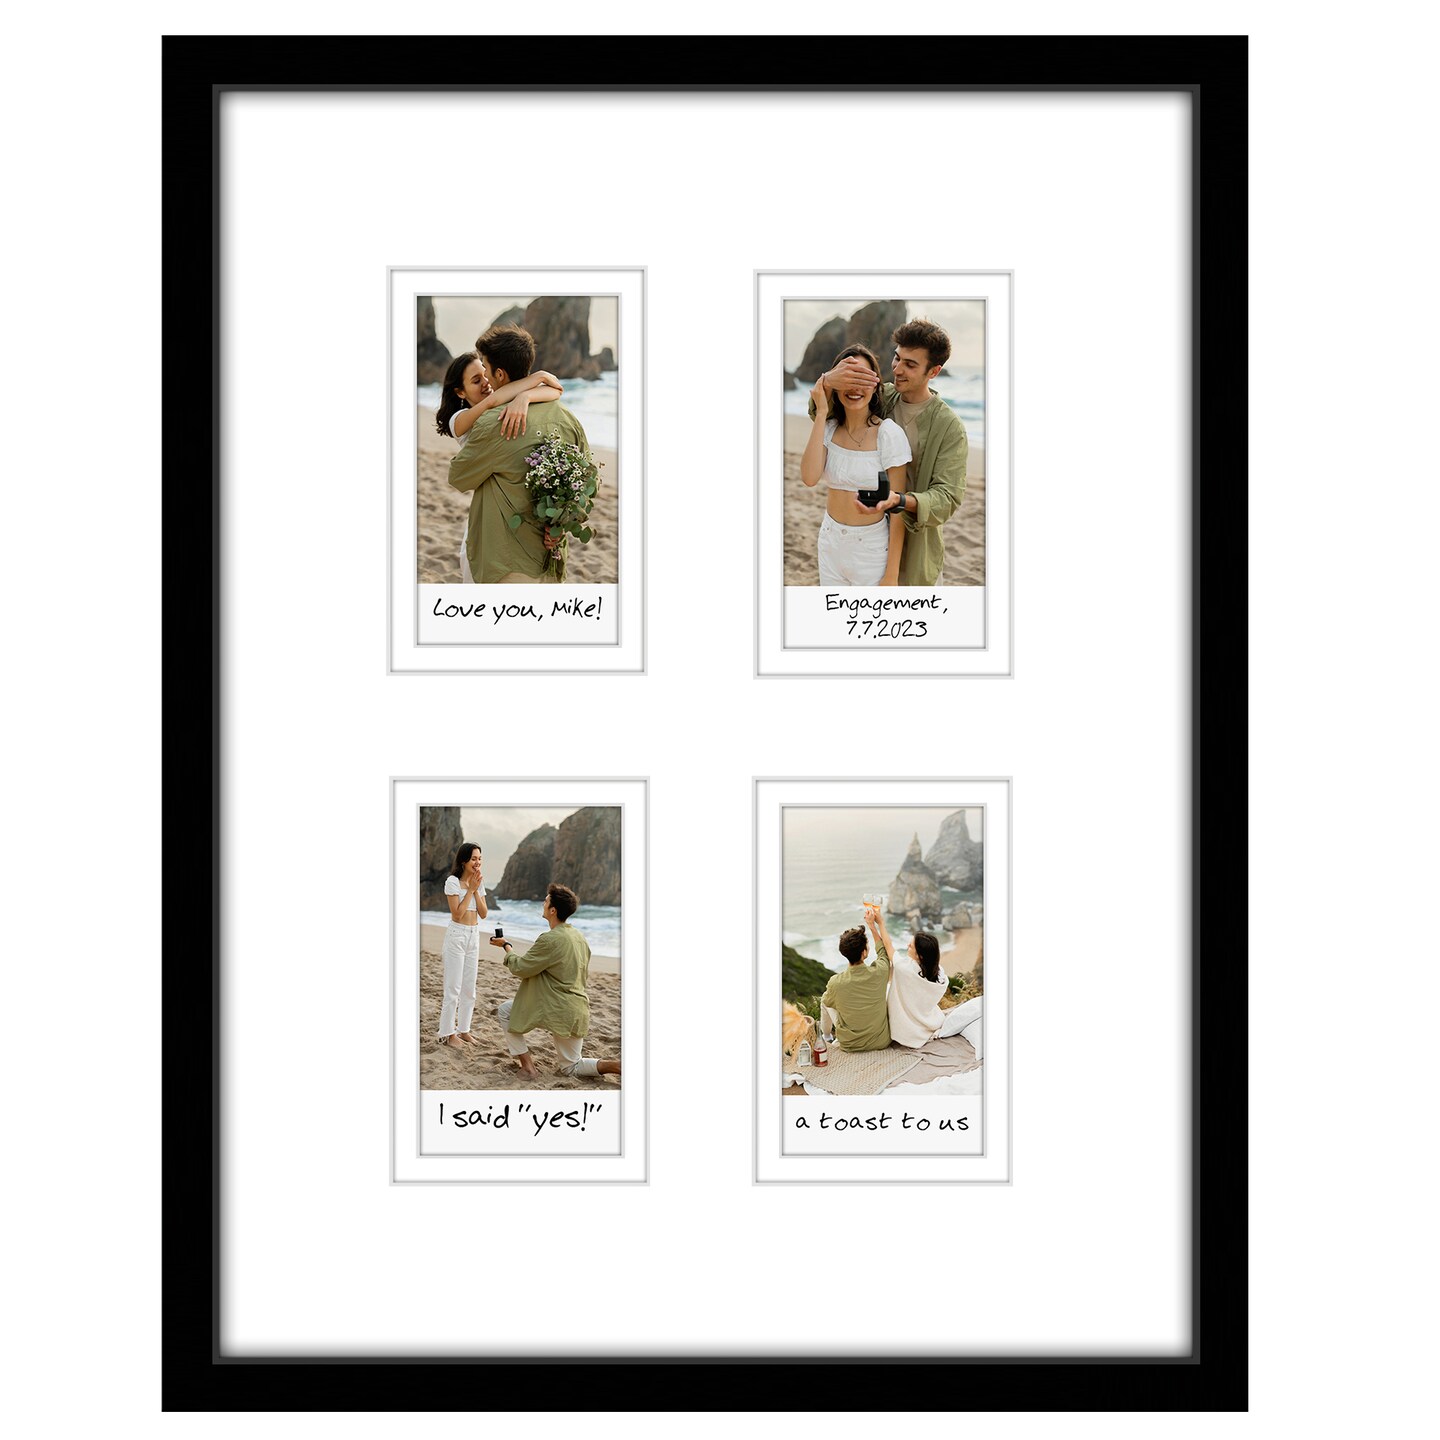 Americanflat Instant Photo Collage Picture Frame